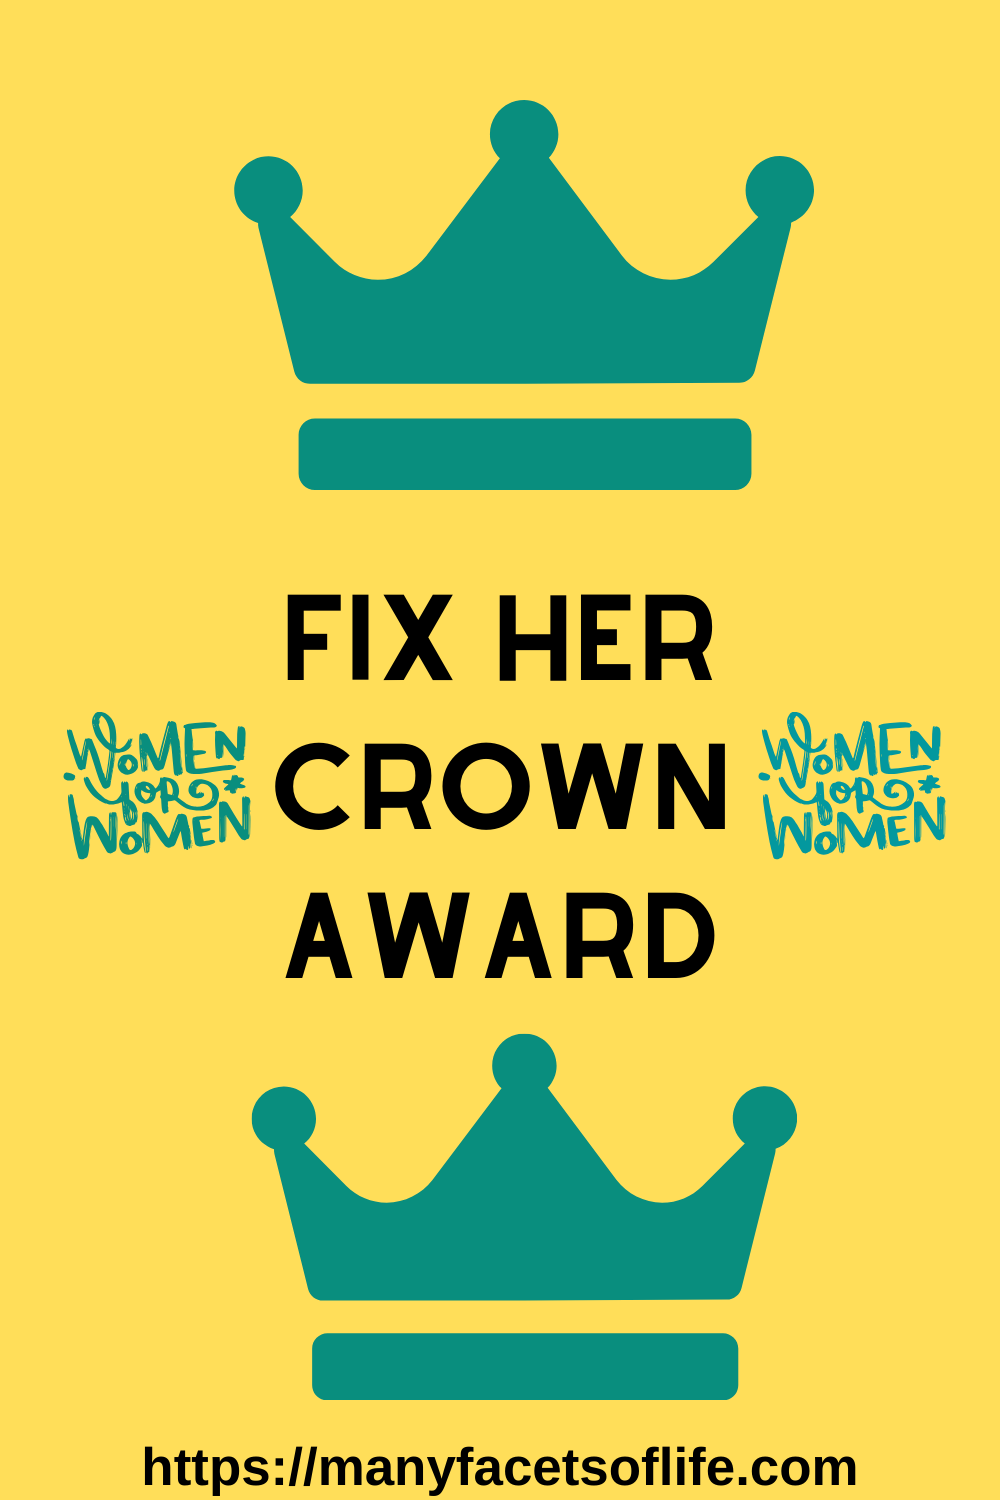 Women Supporting Women: Why Should You Fix Her Crown